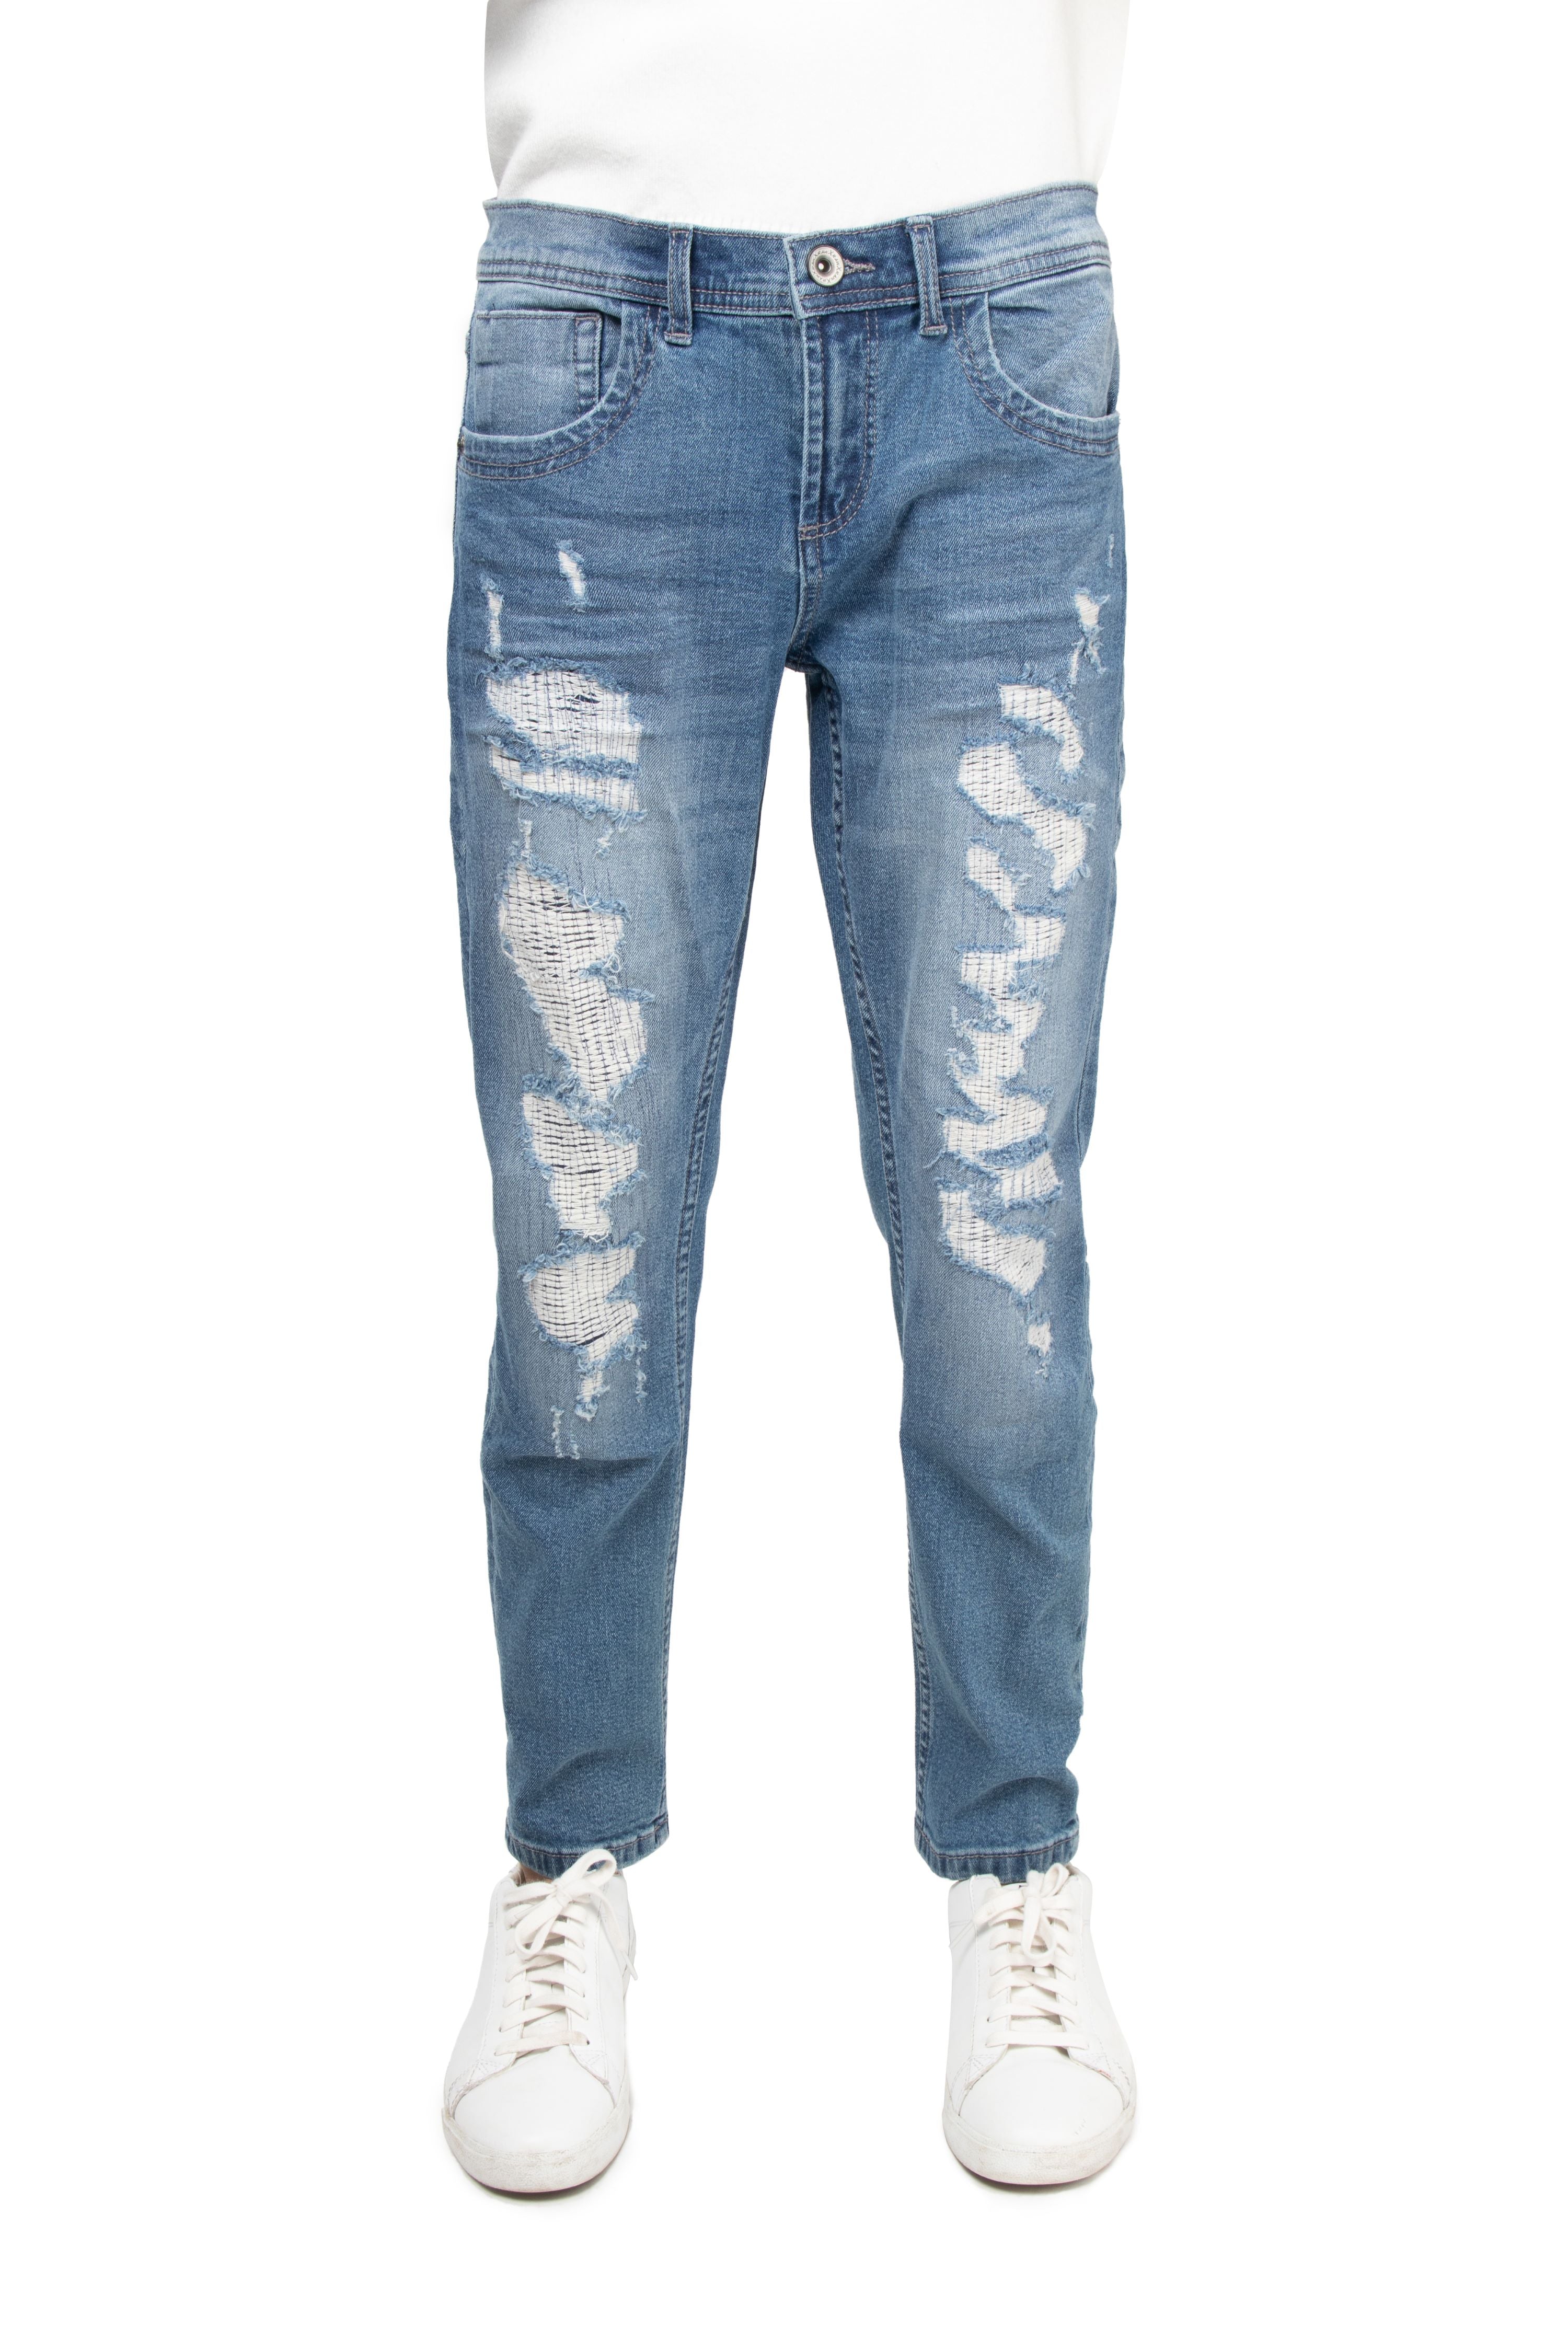 Men's Tapered Jeans, Slim, Ripped, Stretch & More